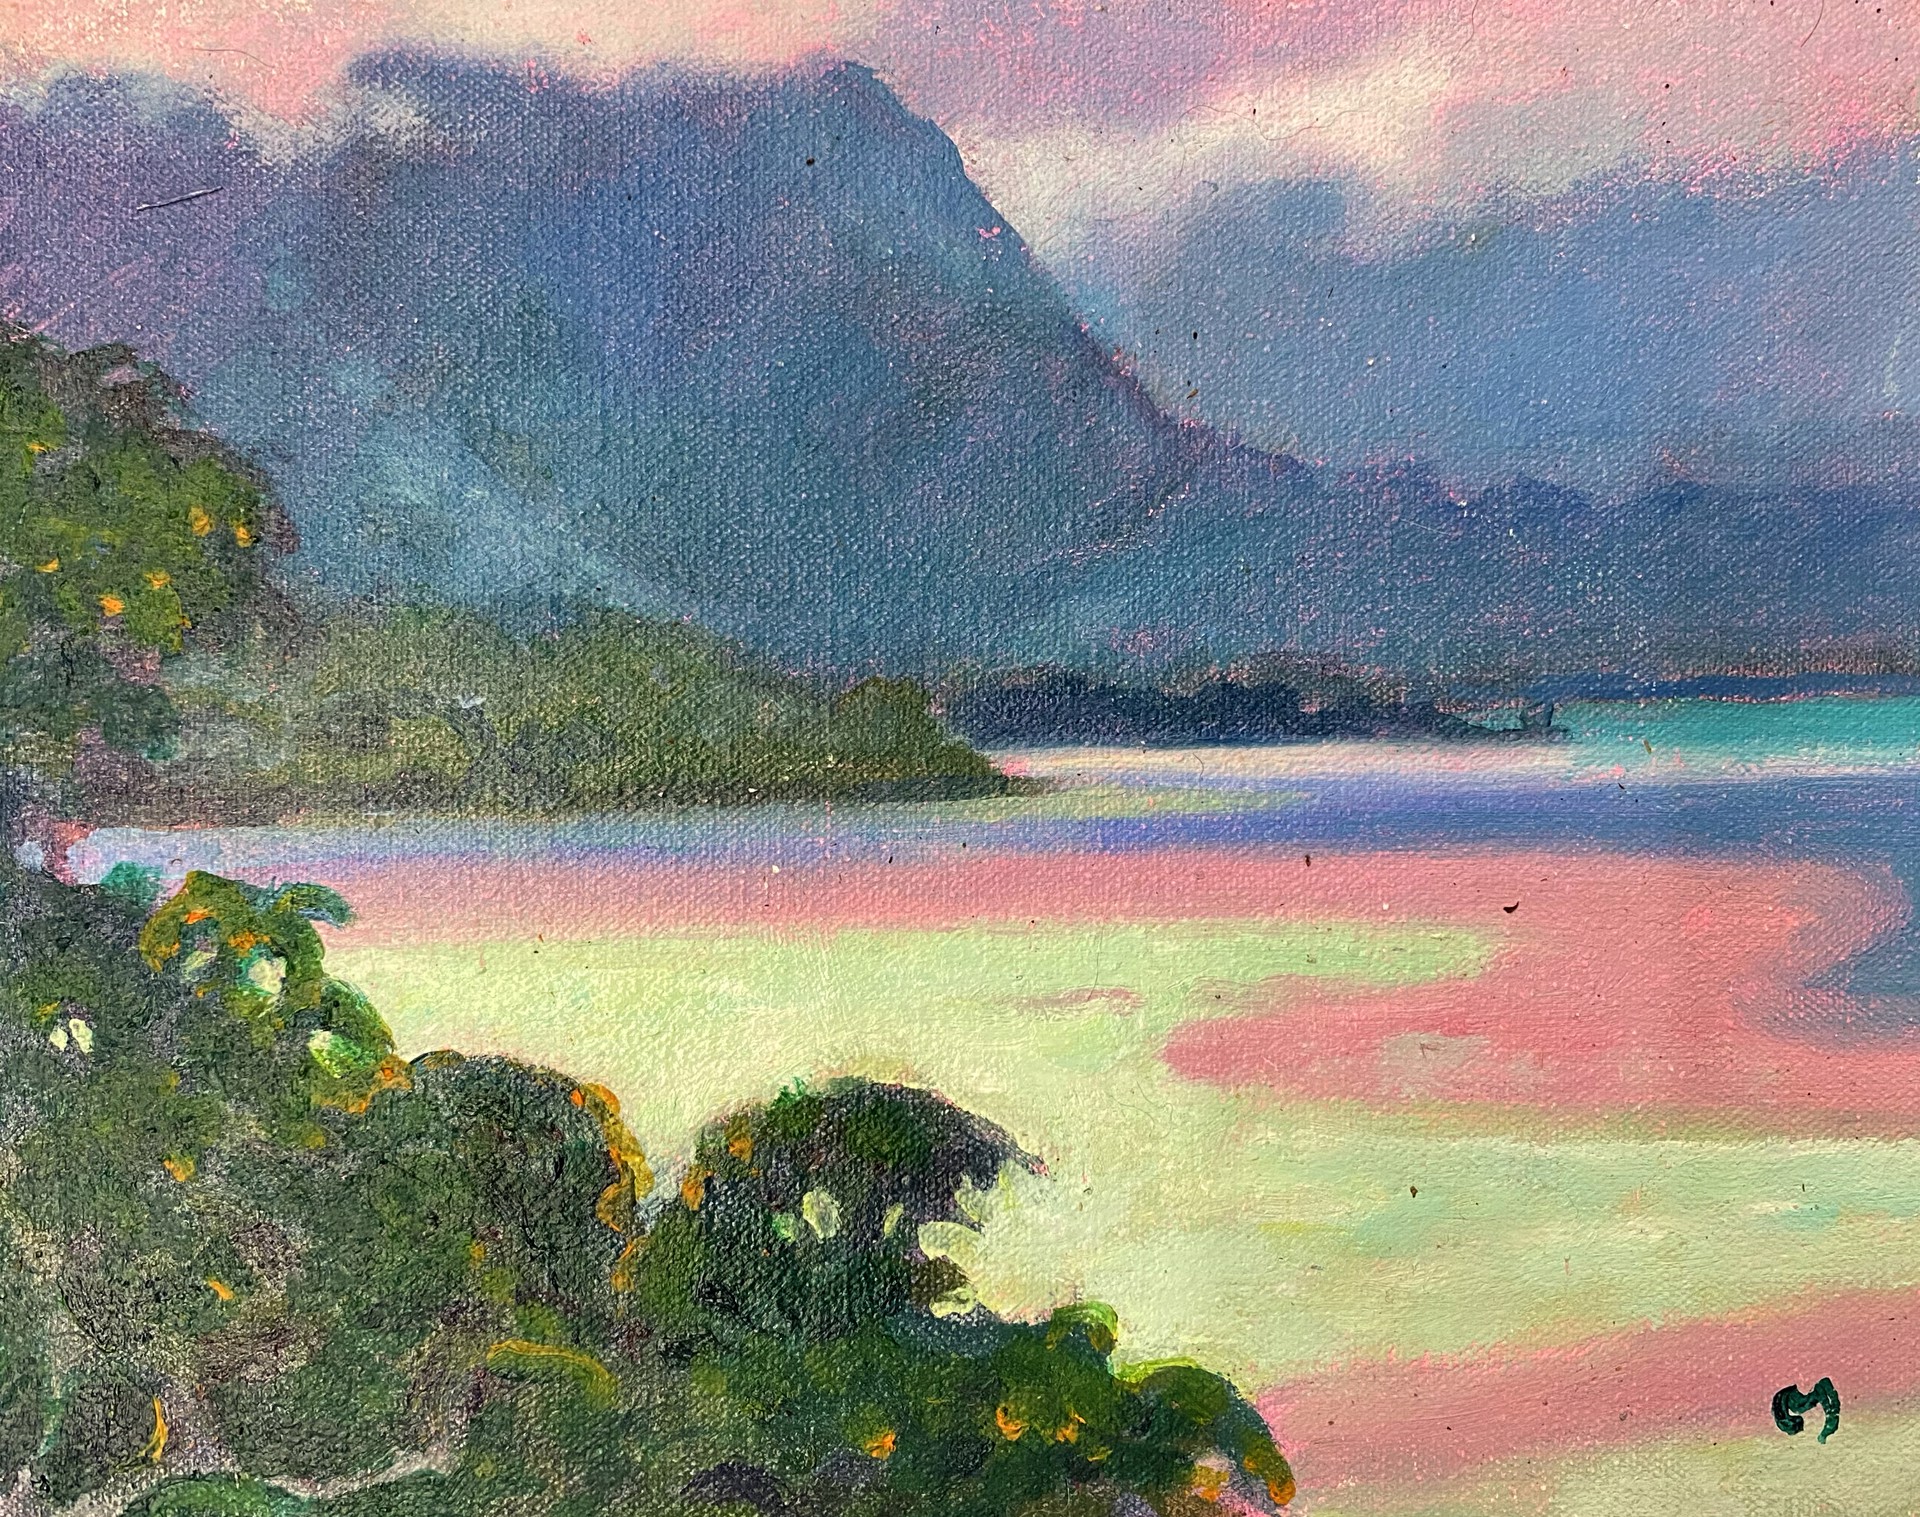 The Reef Kāneʻohe by Dennis Morton